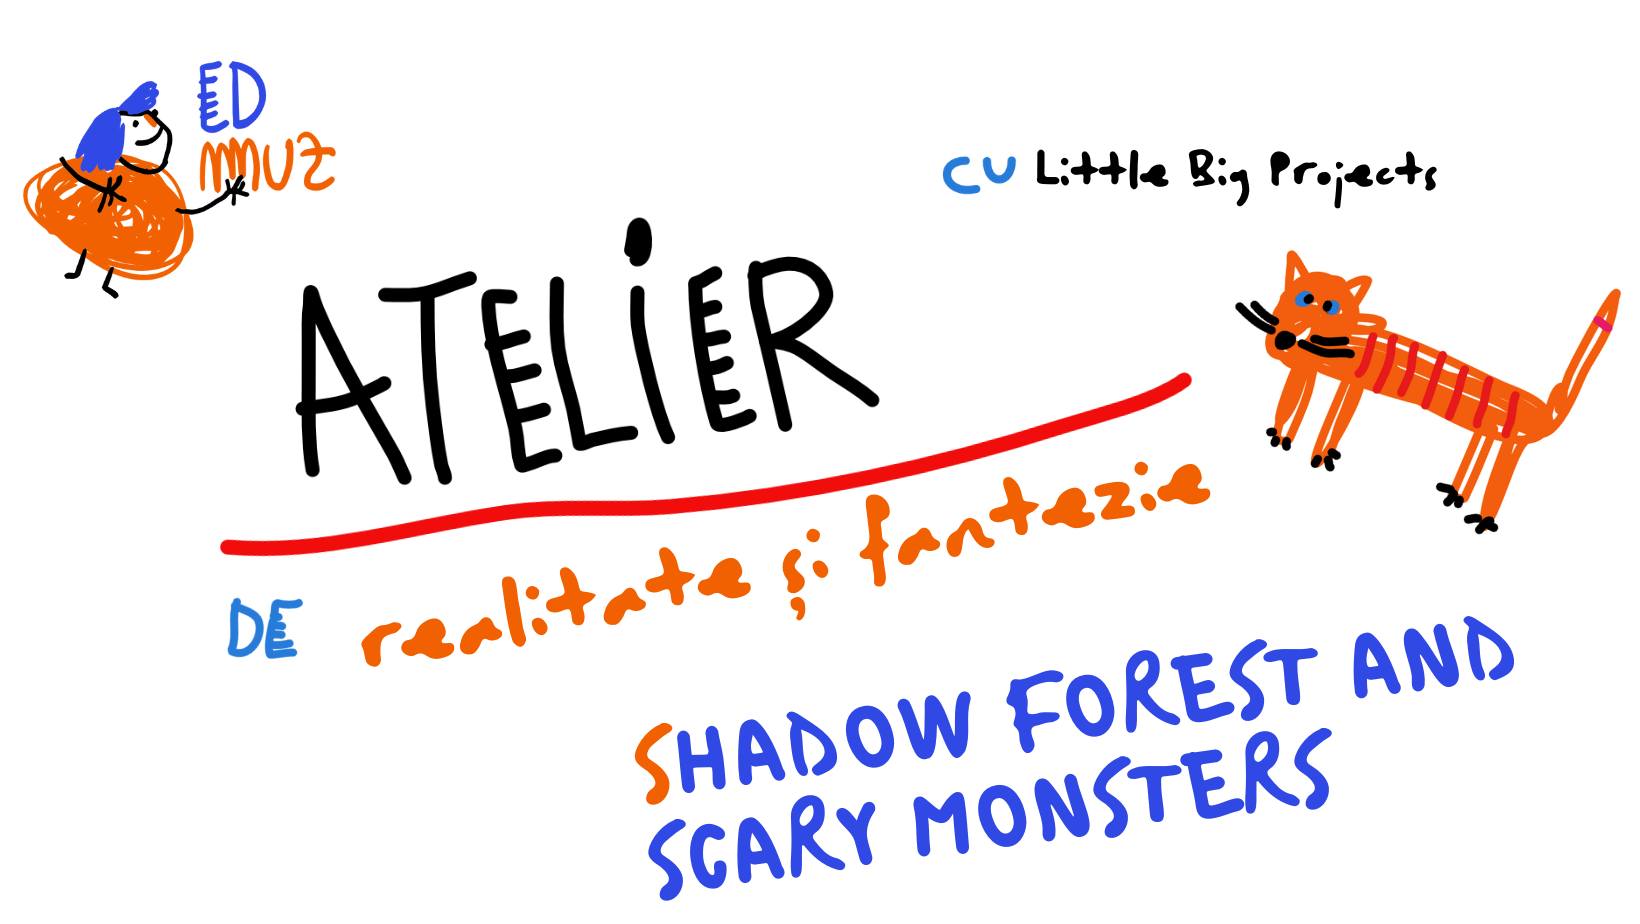 Atelier pentru copii | Shadow Forest and Scary Monsters